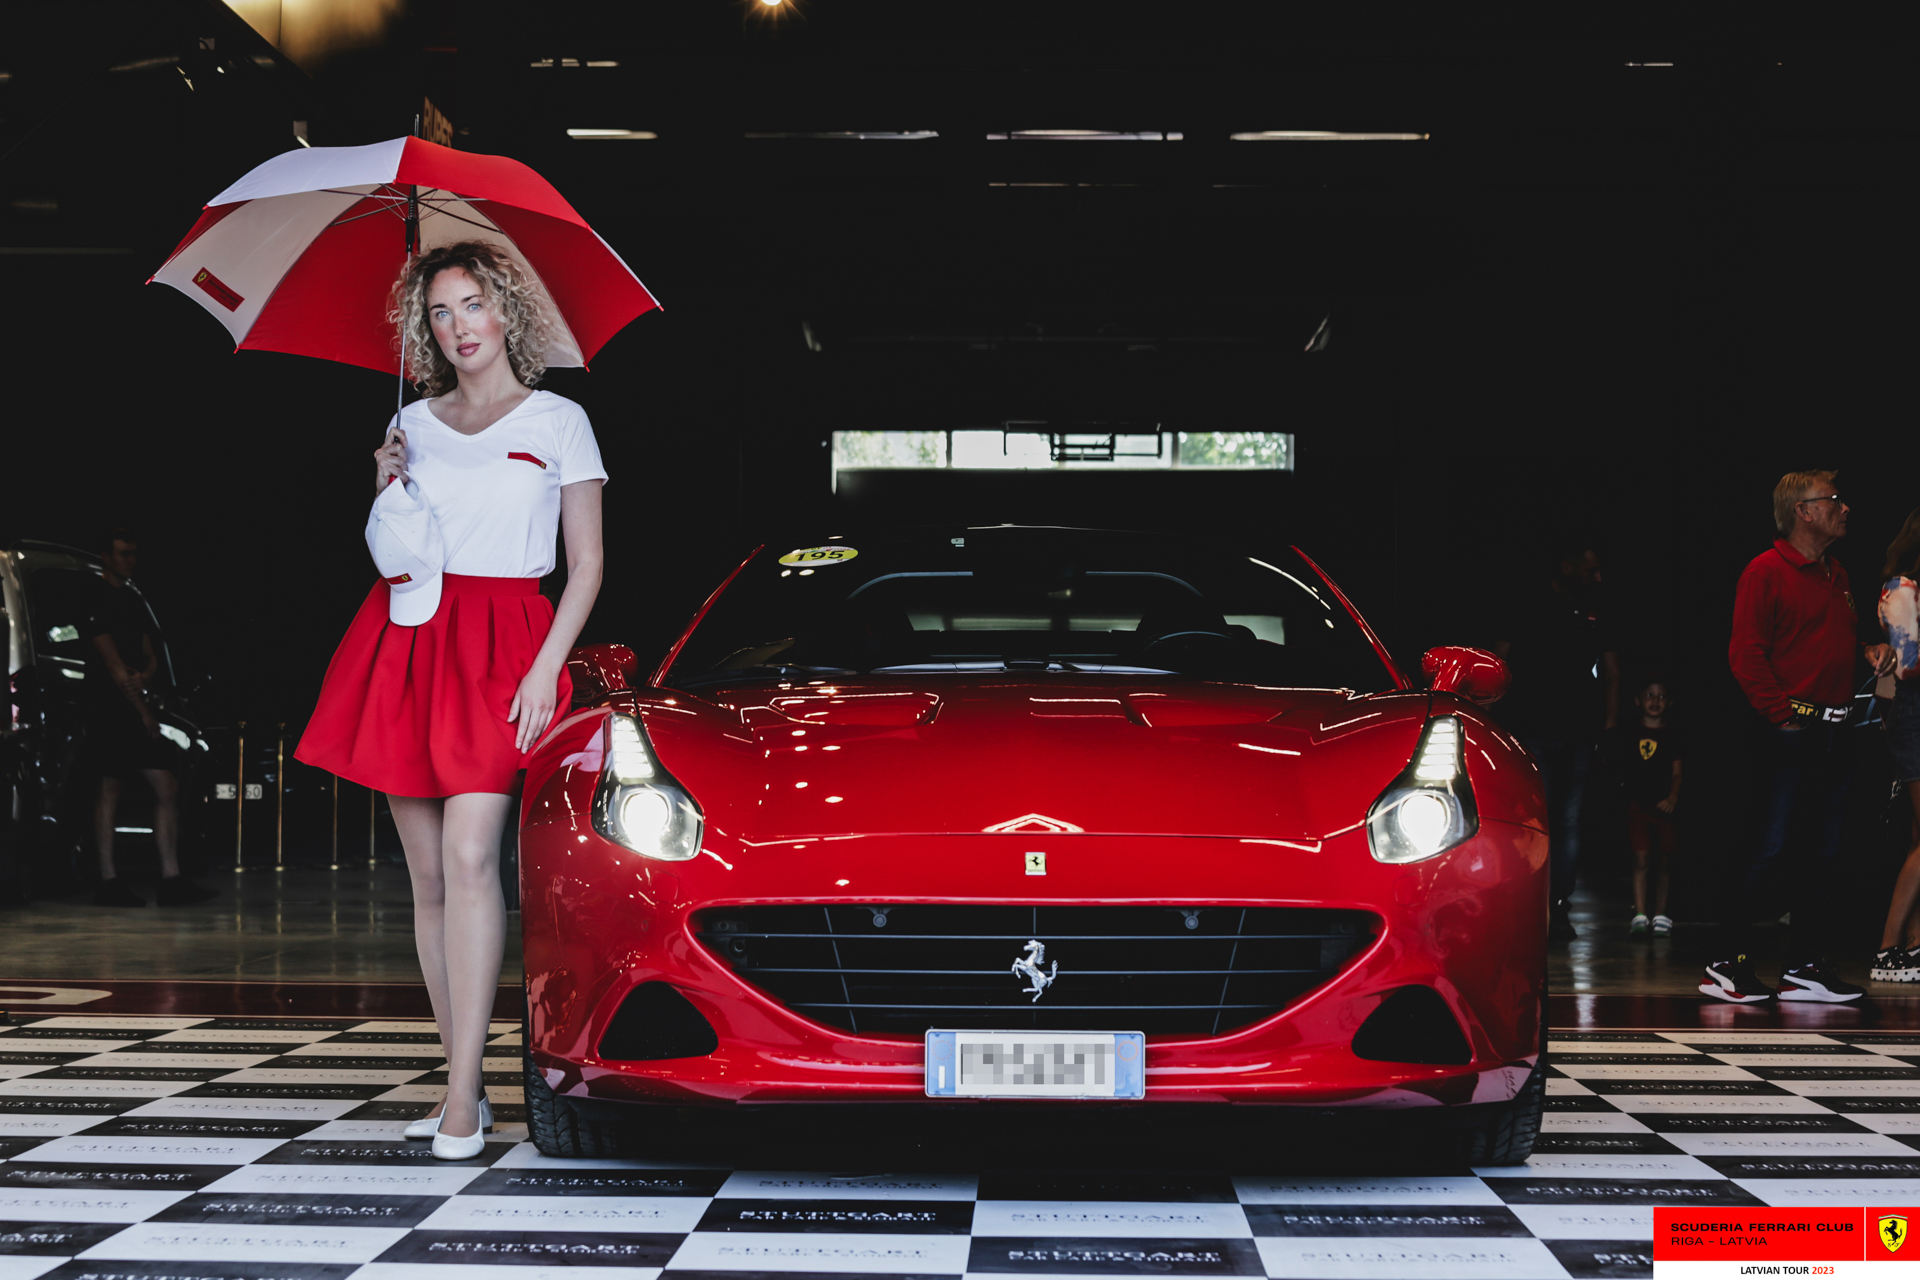 A grid girl and a red Ferrari ready to start the tour.